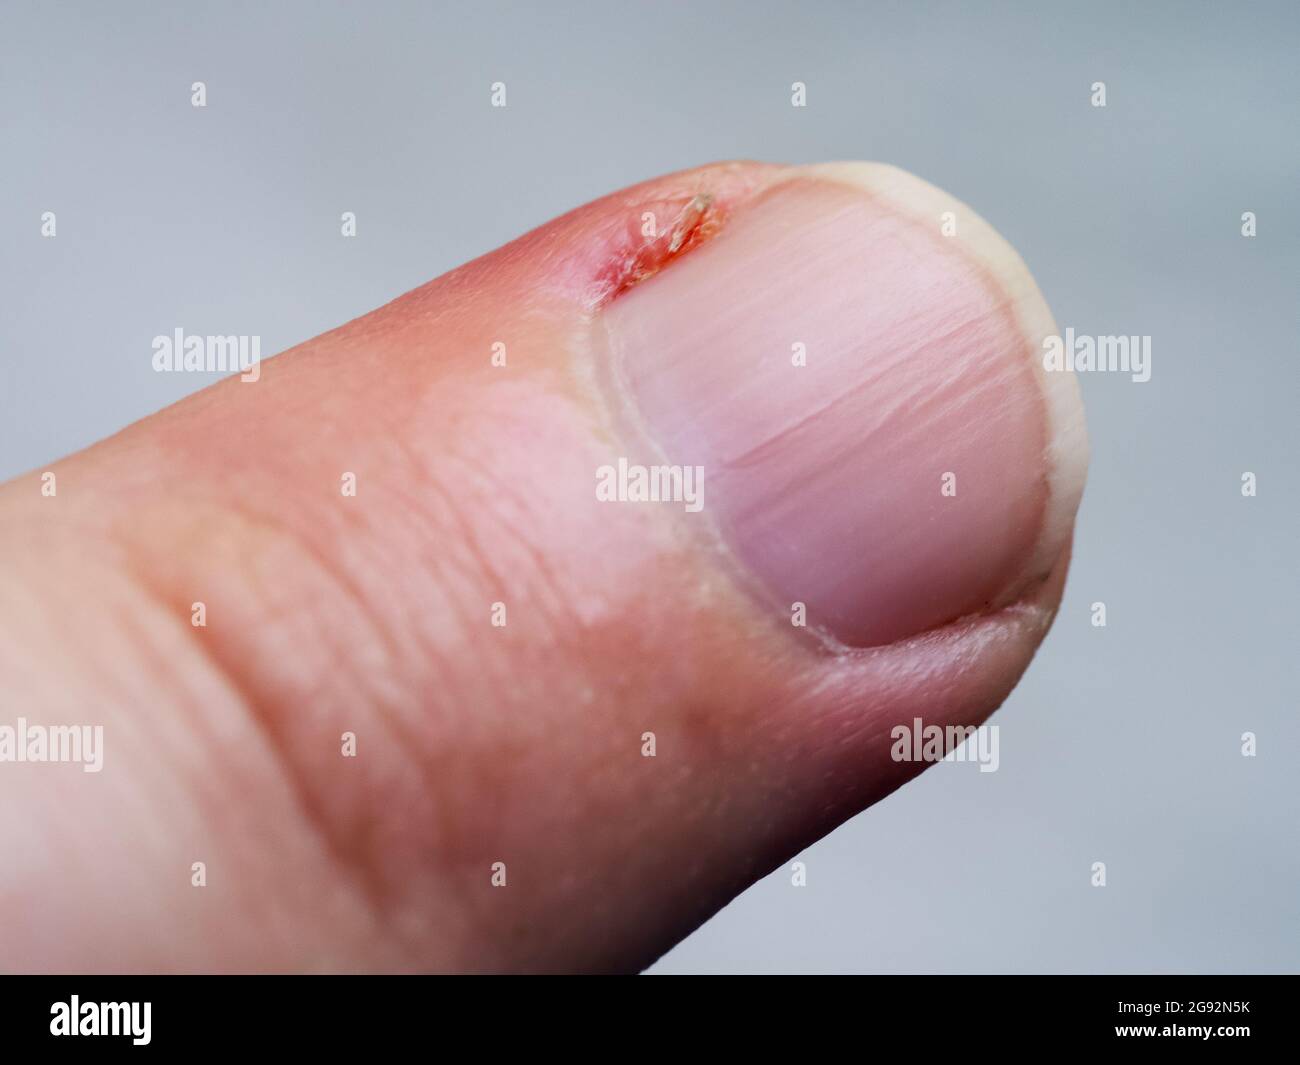 Inflamed cuticle on the finger. Damaged part of the finger, close-up. Stock Photo